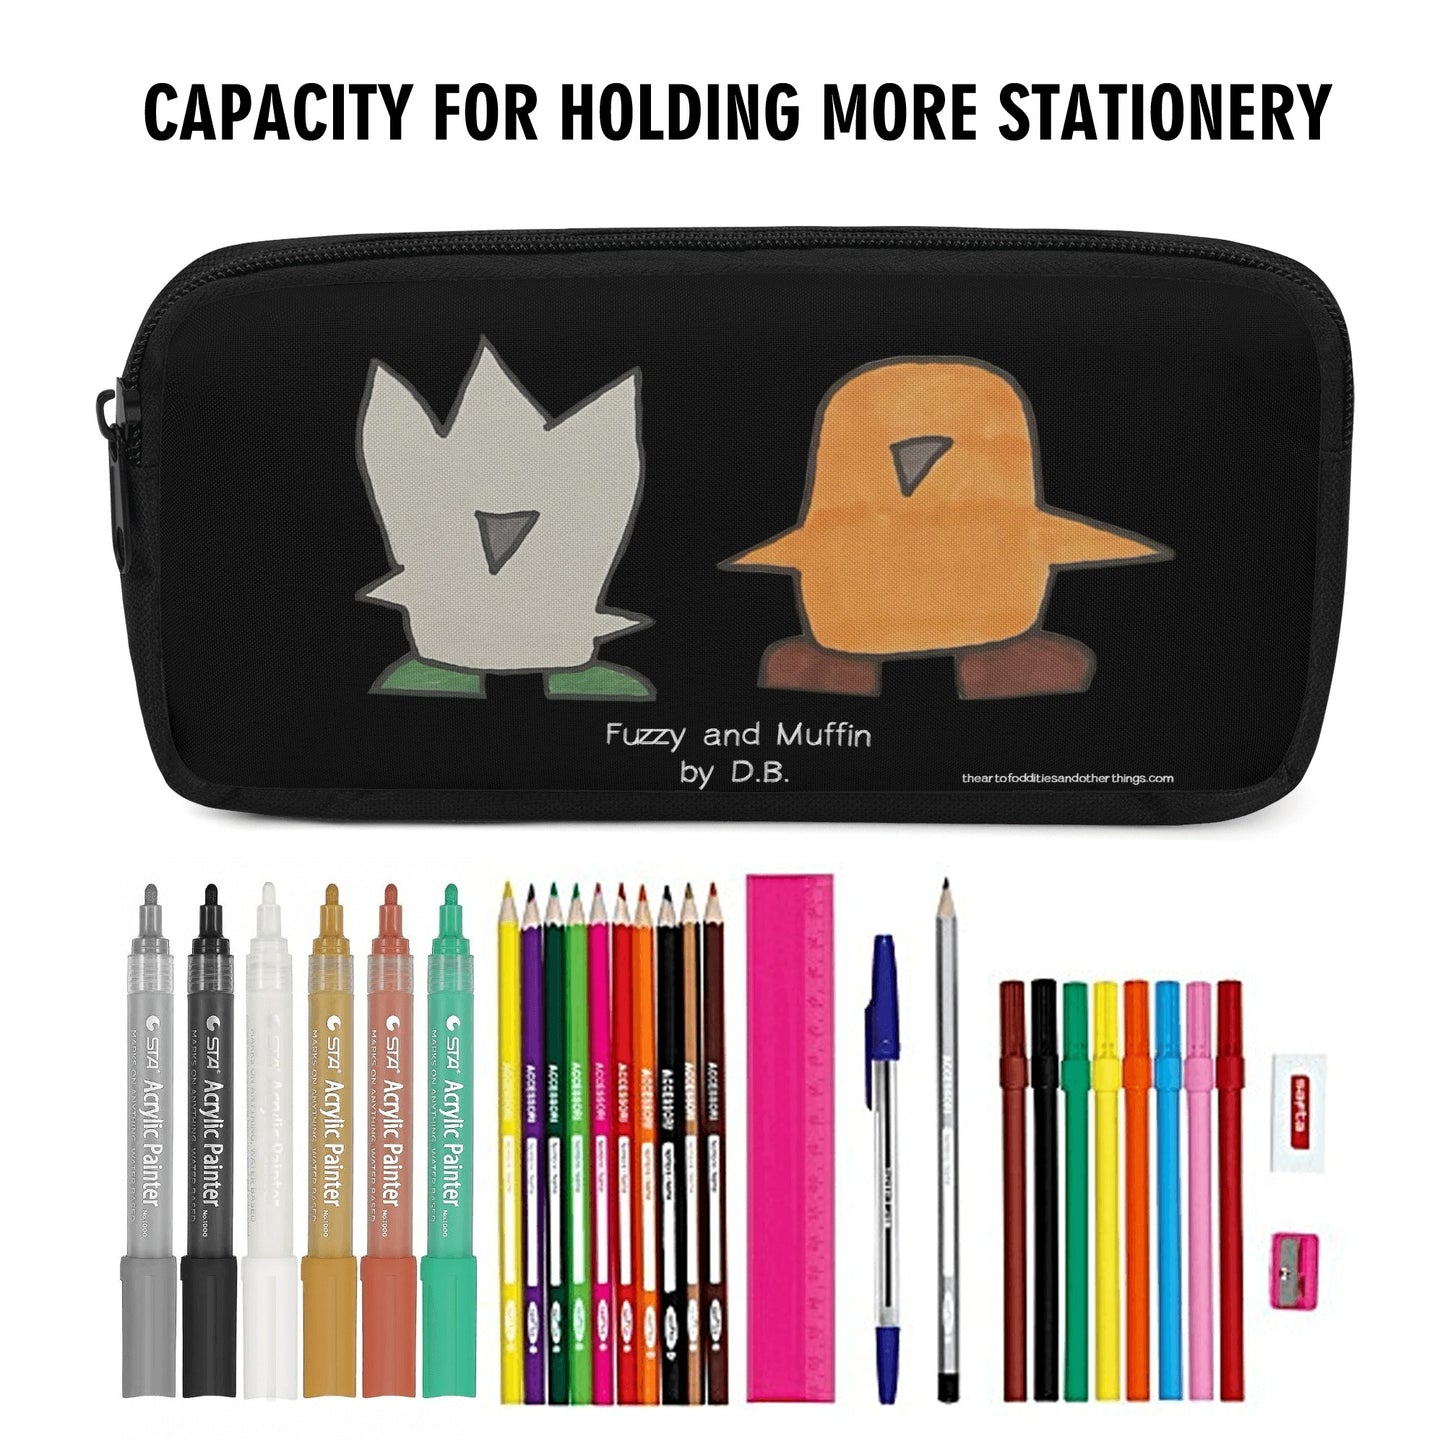 Fuzzy and Muffin by D.B. Pencil Case (Black)